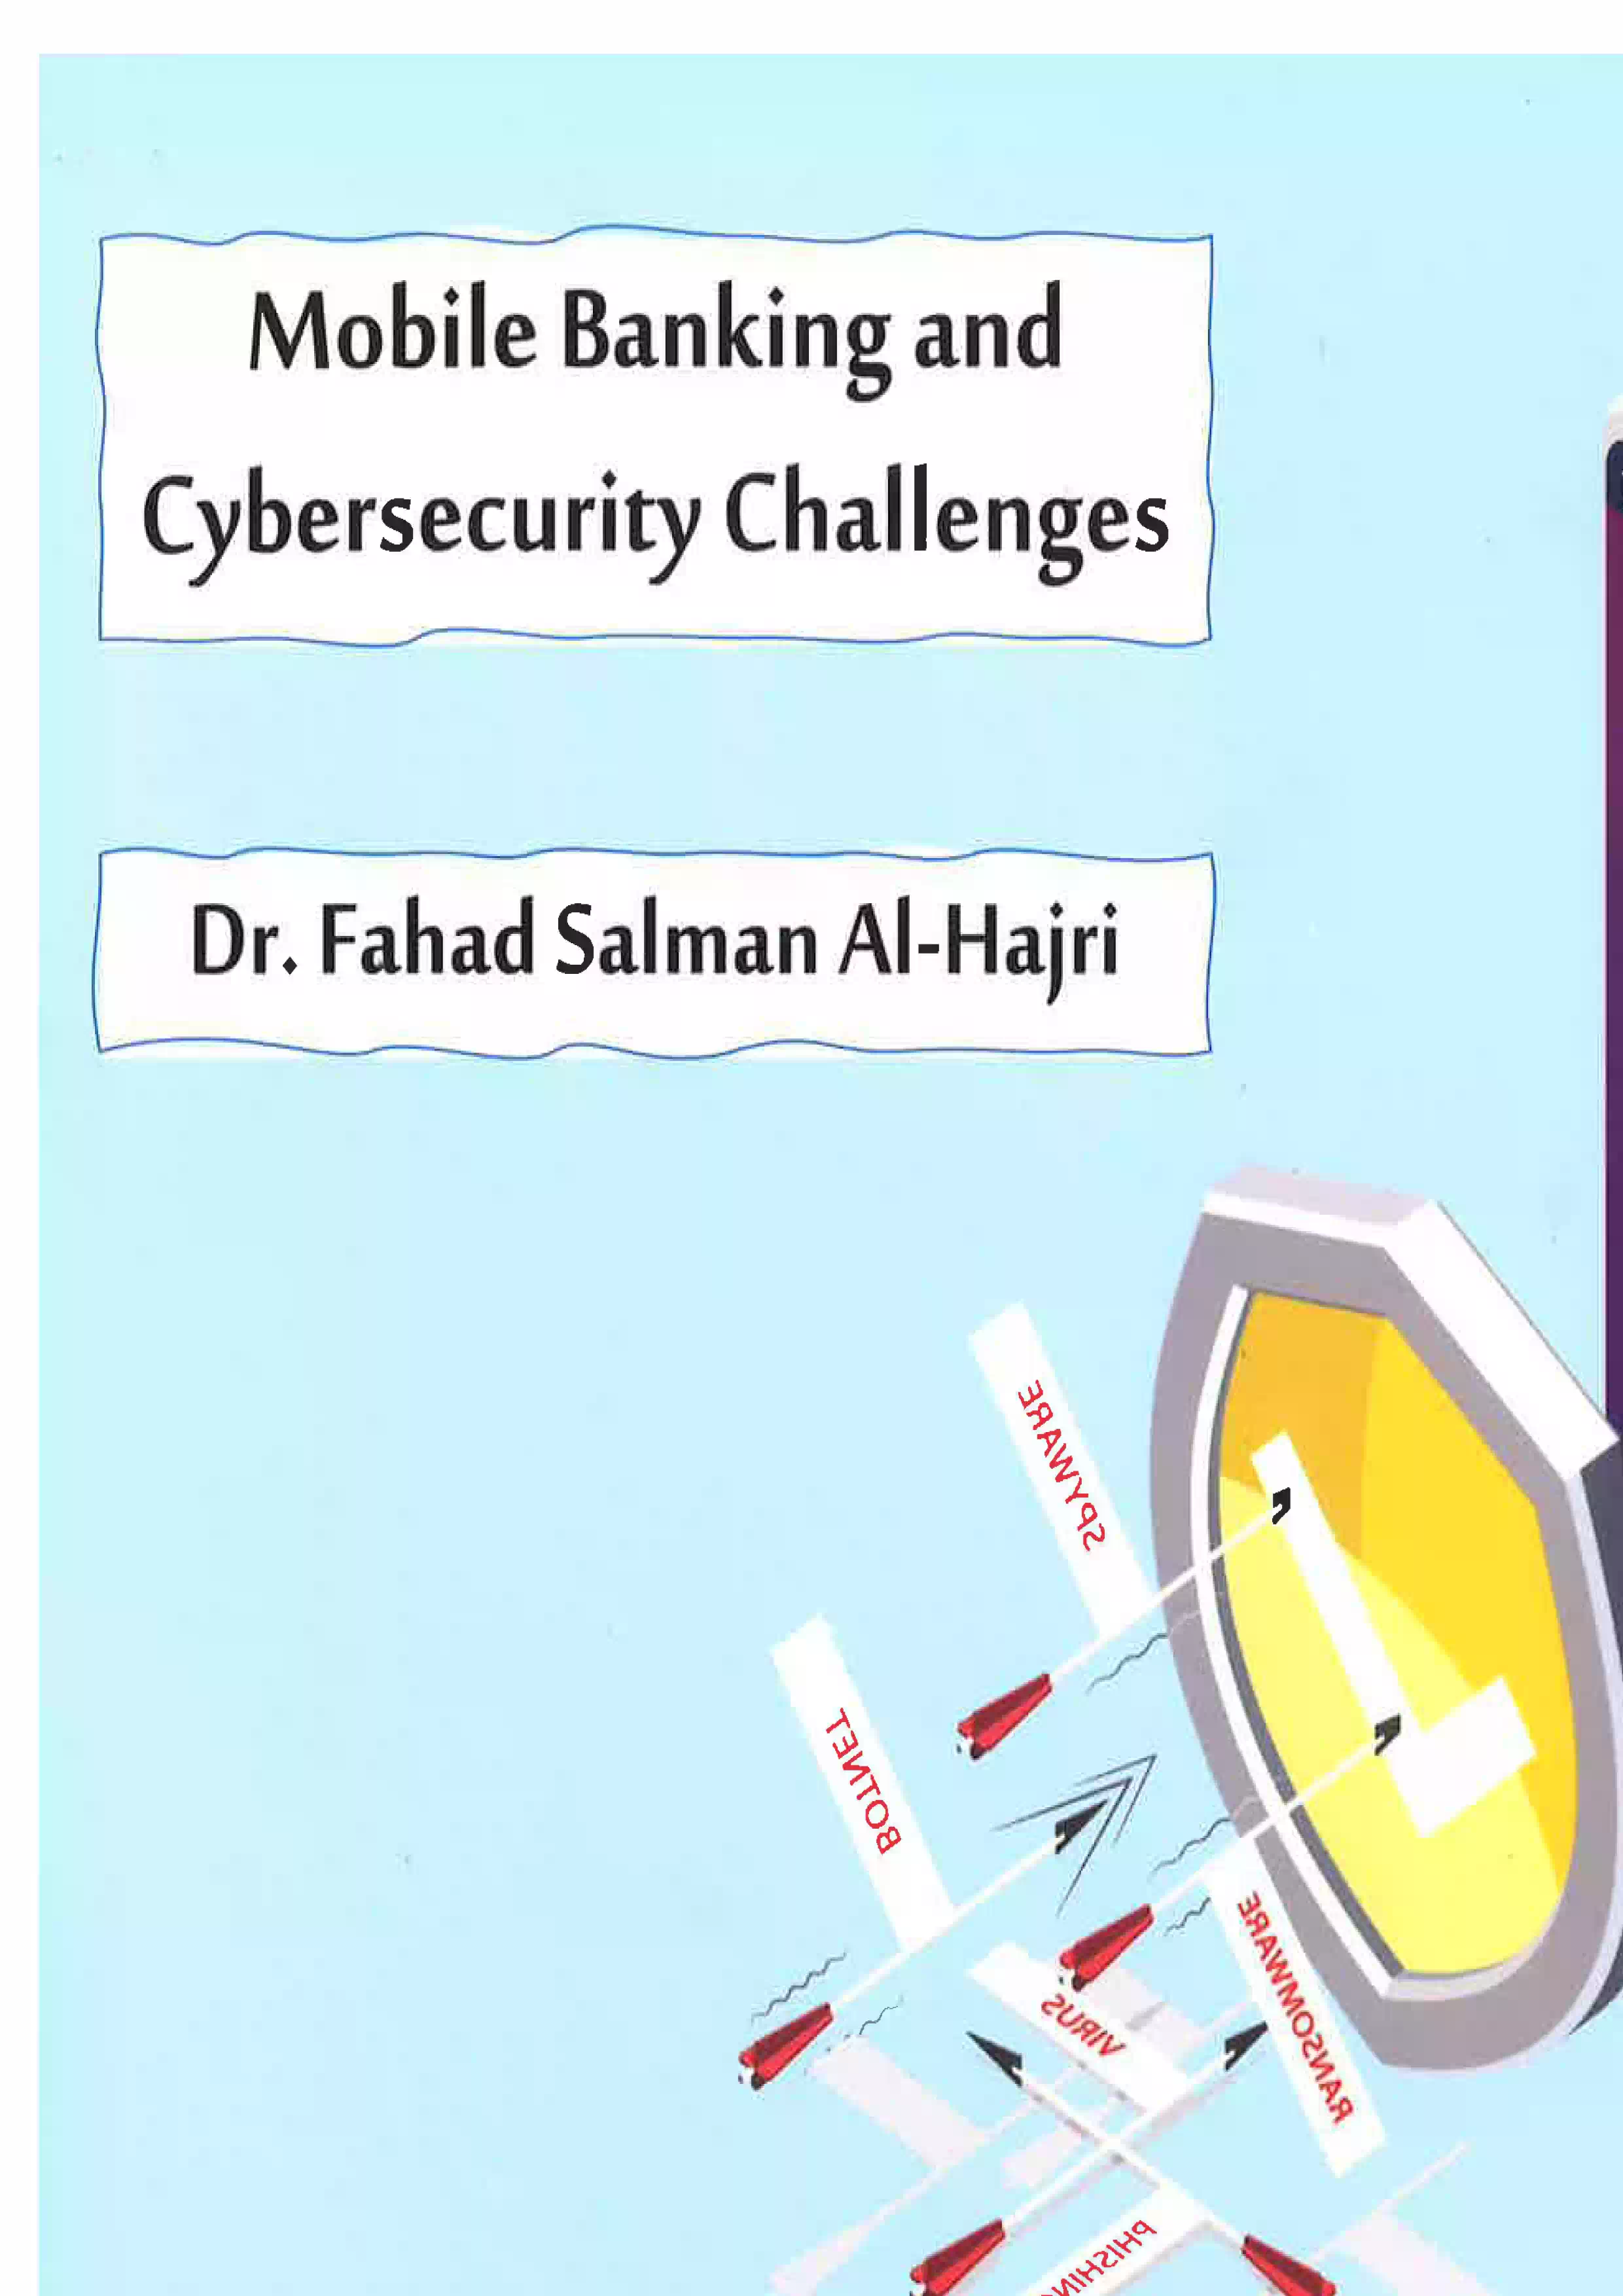 Mobile Banking and Cybersecuity Challenges